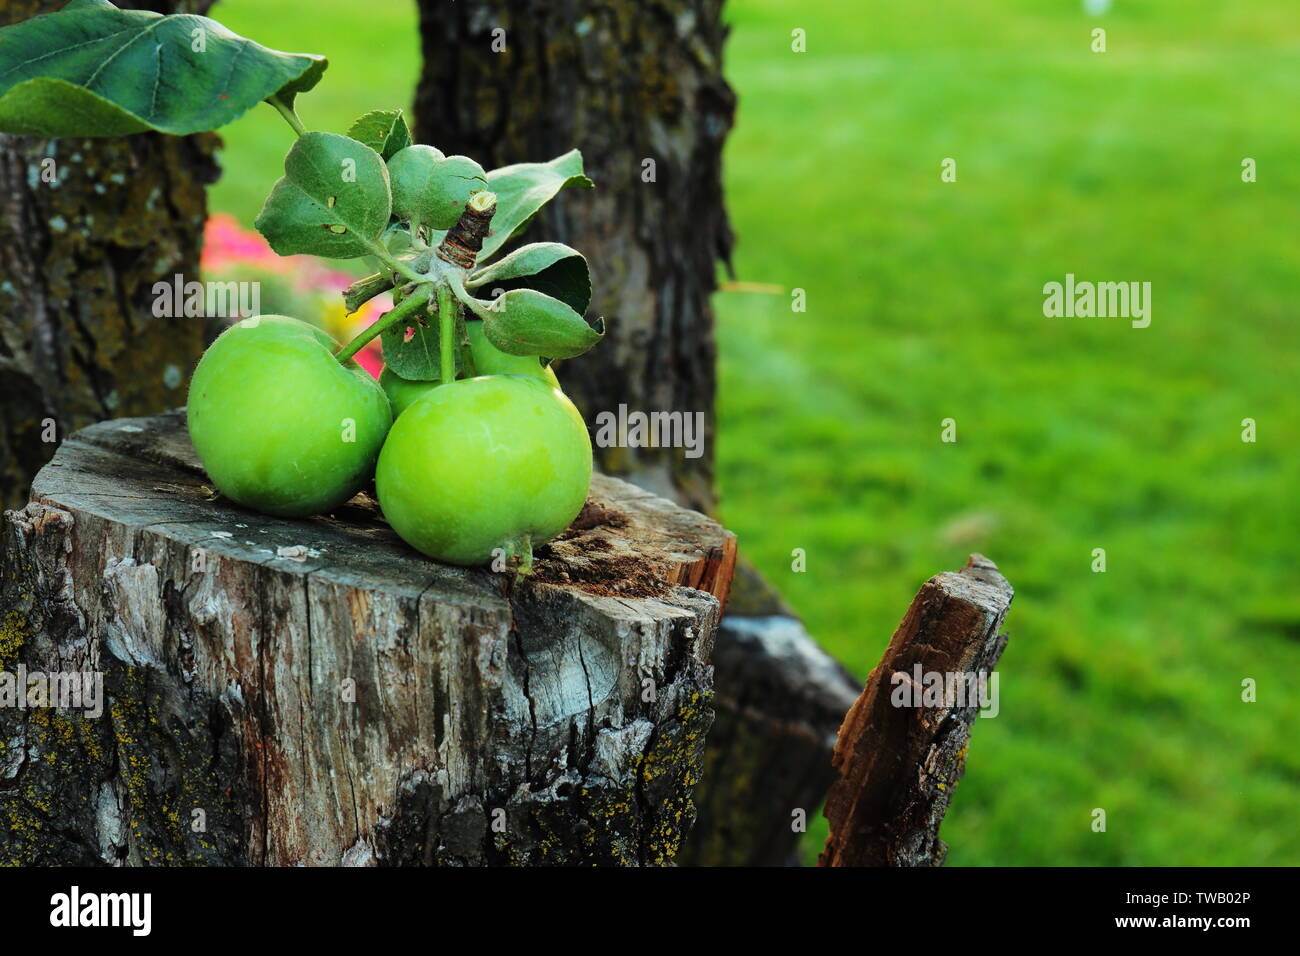 Bunch of green apples with leaves attached sitting on sawed off portion of apple tree tree Stock Photo